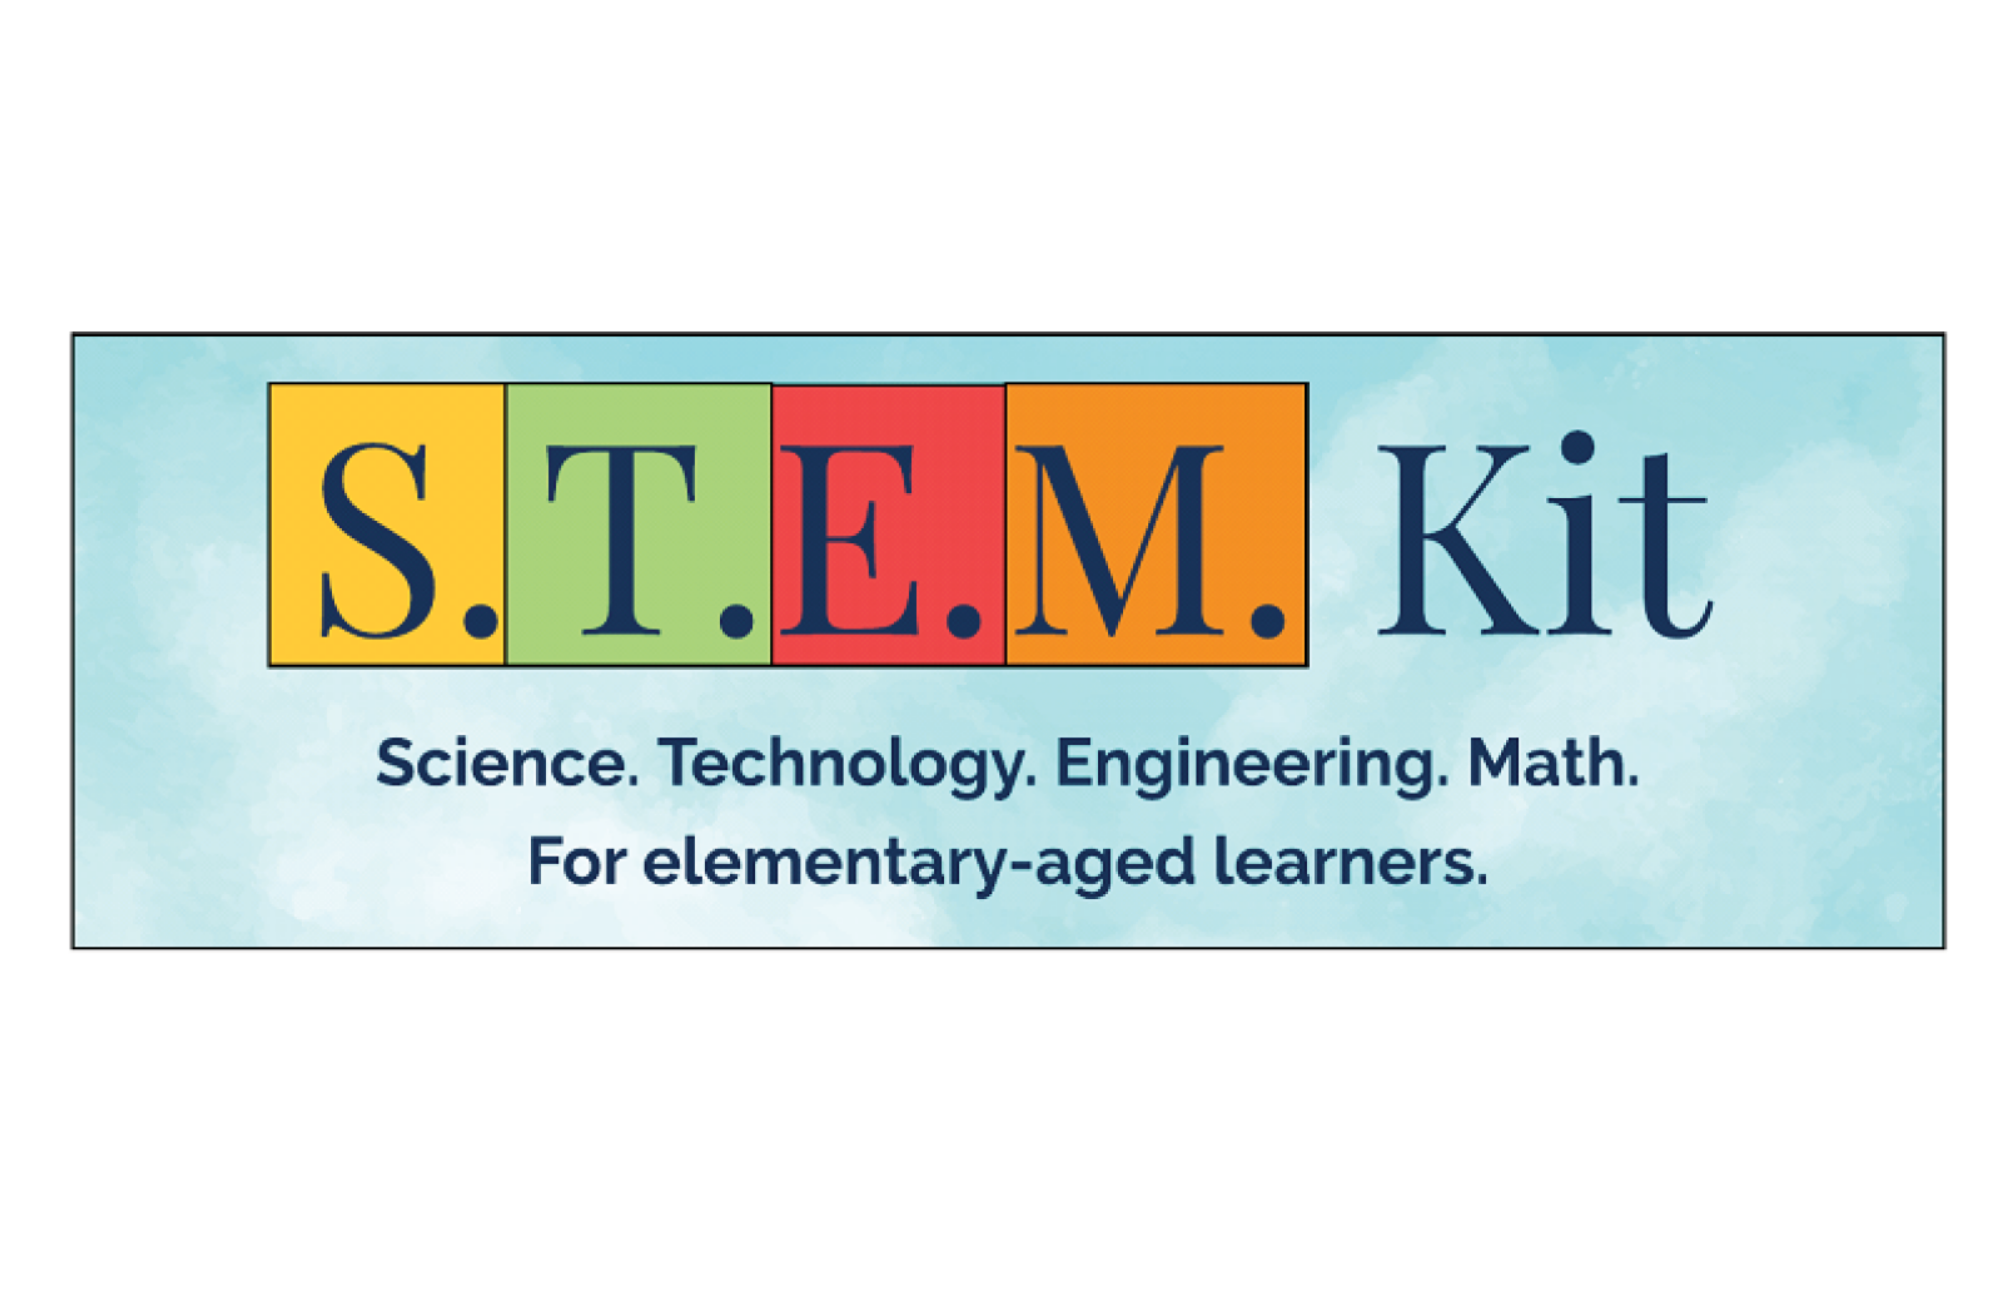 STEM Kits. Science Technology Engineering and Math Kits for elementary-aged learners.